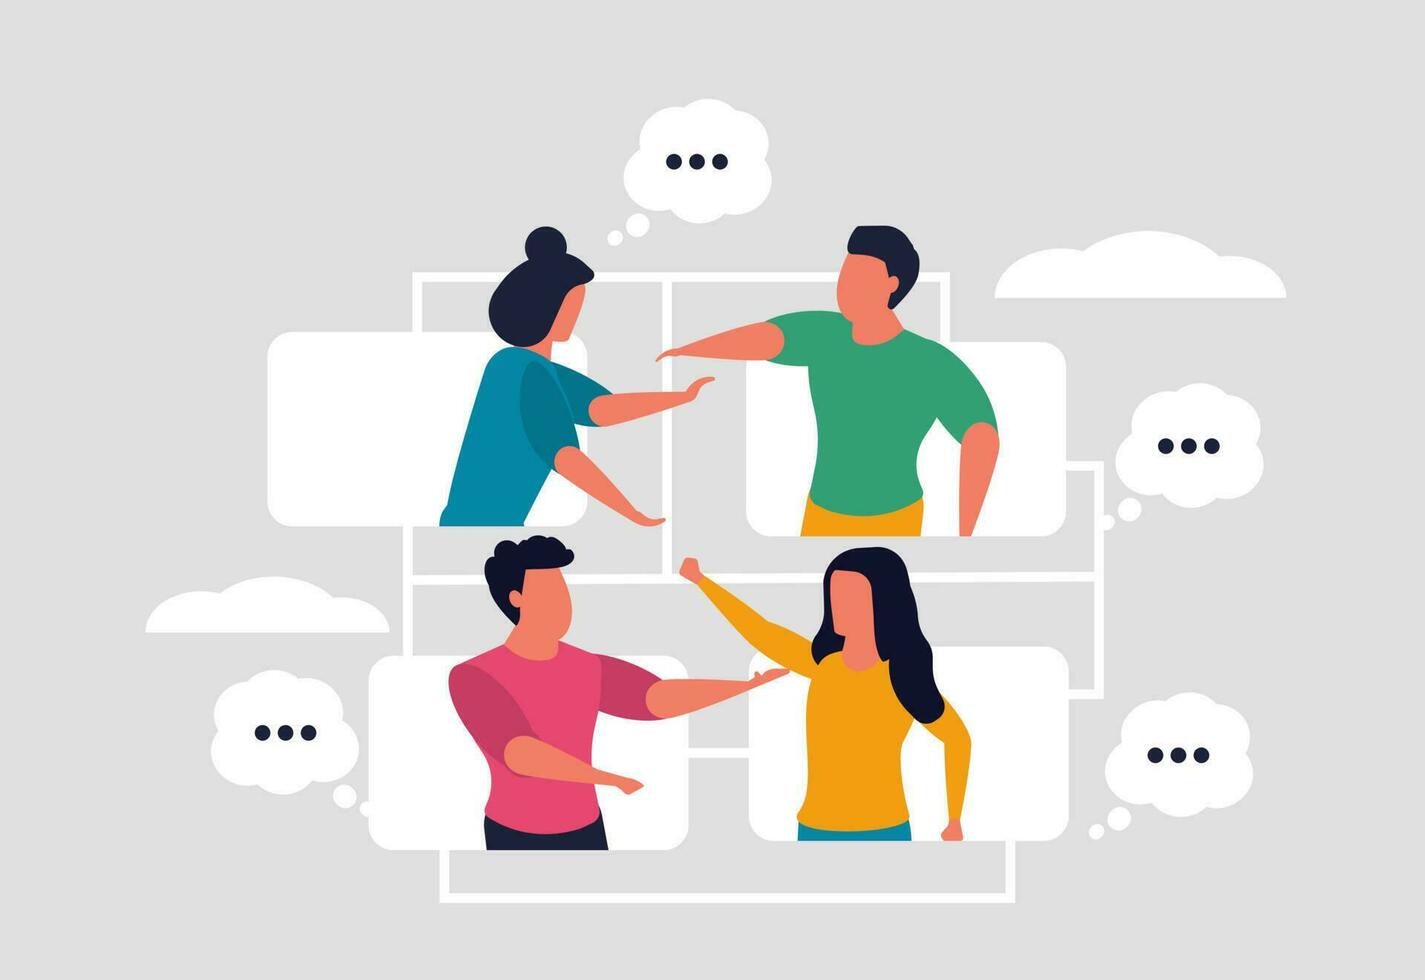 Online meeting or remote communication of colleagues at work. Internet communication and videoconferencing. Collaboration and collaboration made easy. Vector illustration concept